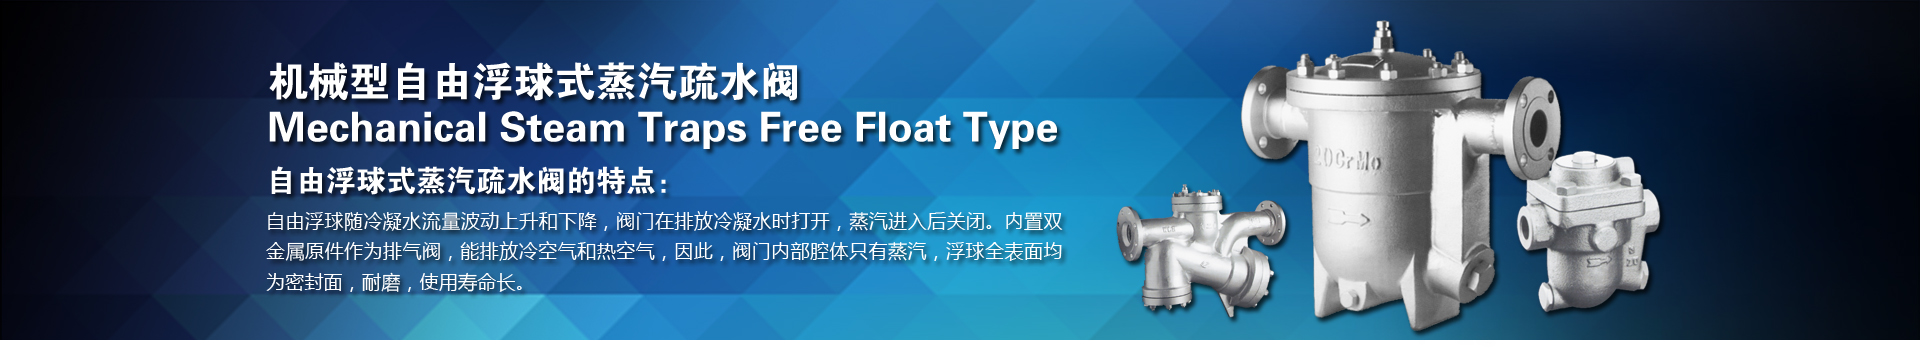 Free Float Steam Traps